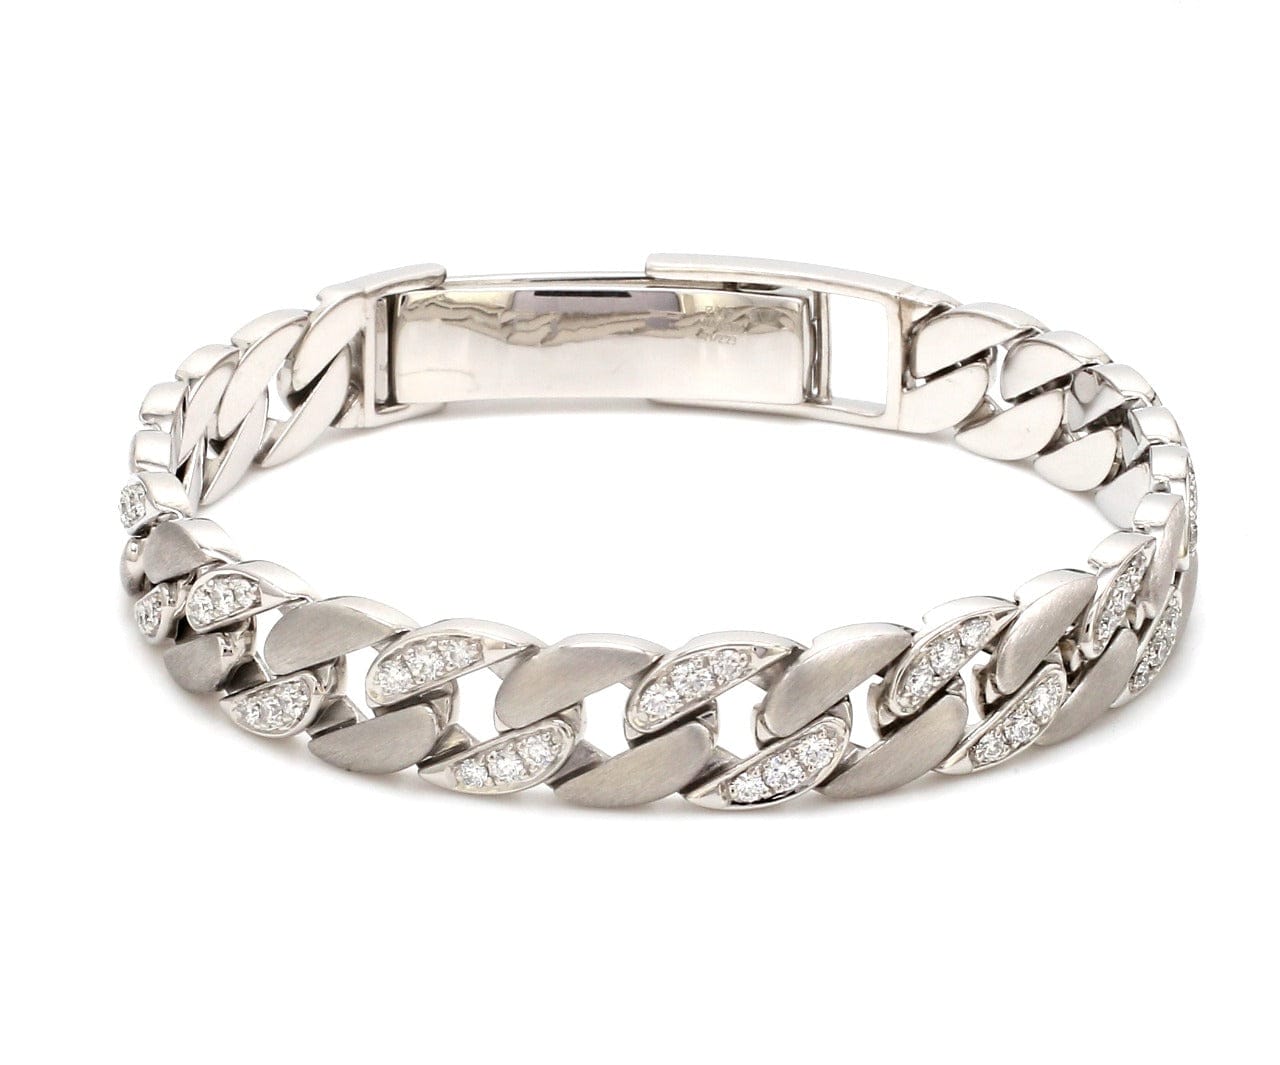 THE SILVER CUBAN LINK BRACELET  The M Jewelers